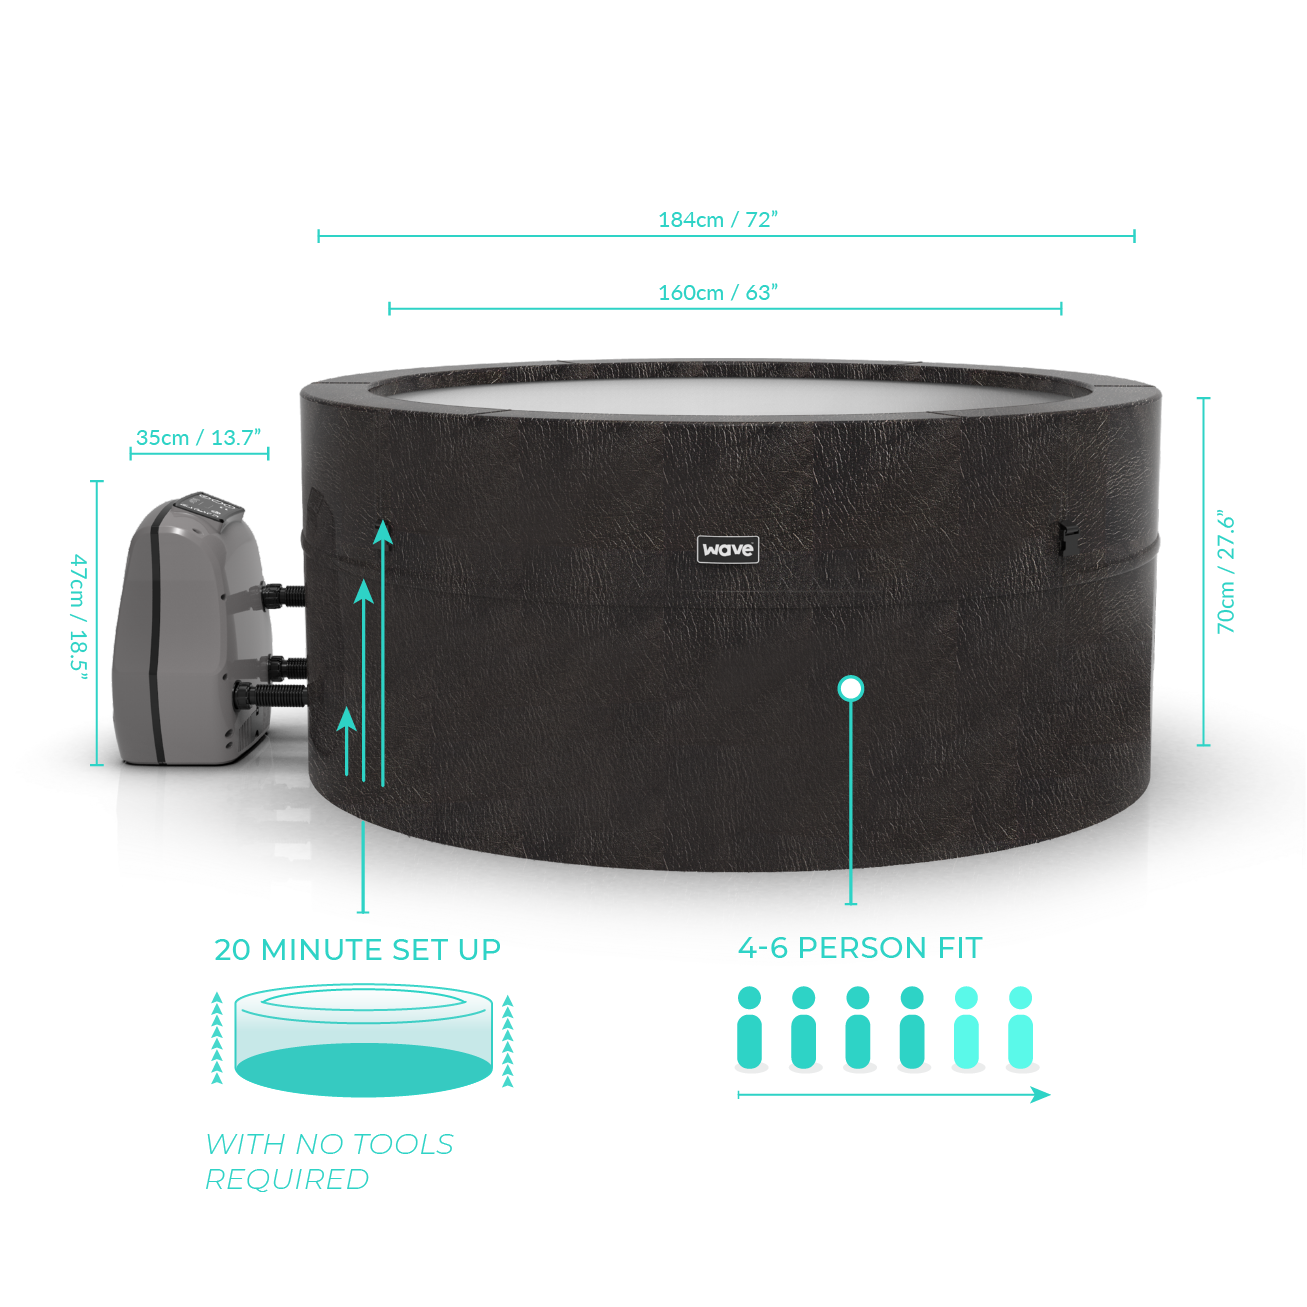 Wave Osaka 6 Person Rigid Foam Hot Tub, Thermal Efficient, Insulated Spa, Charcoal Grey - Wave Spas Inflatable, foam Hot Tubs